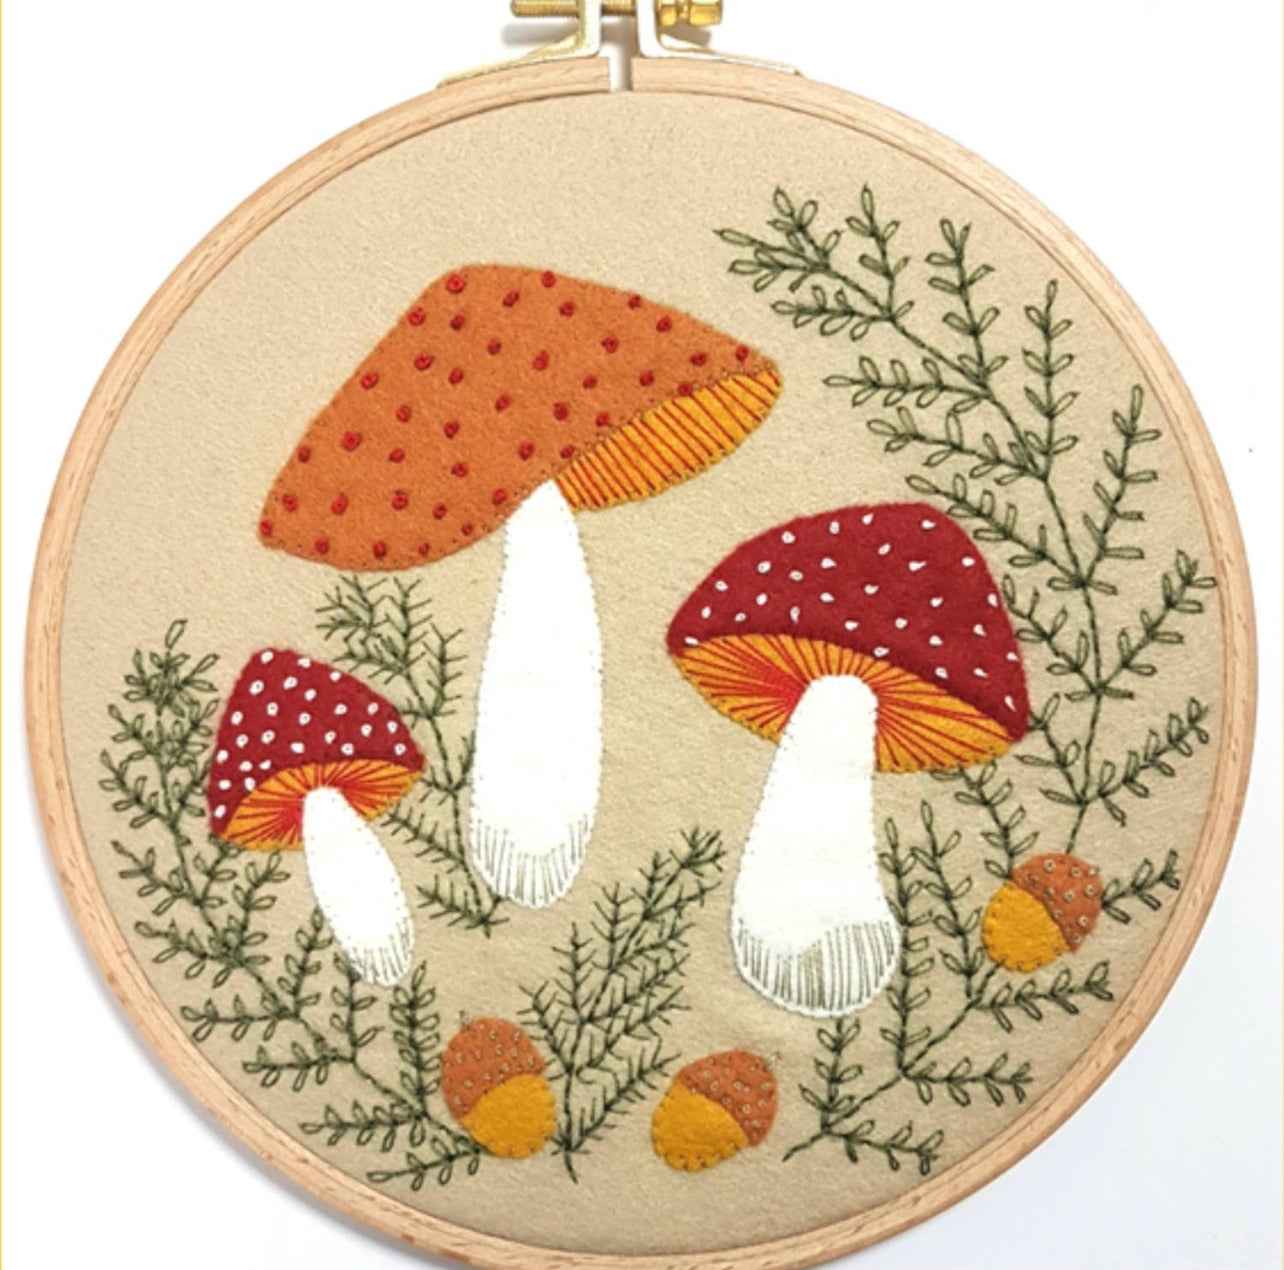 How to Applique with Wool Blend Felt